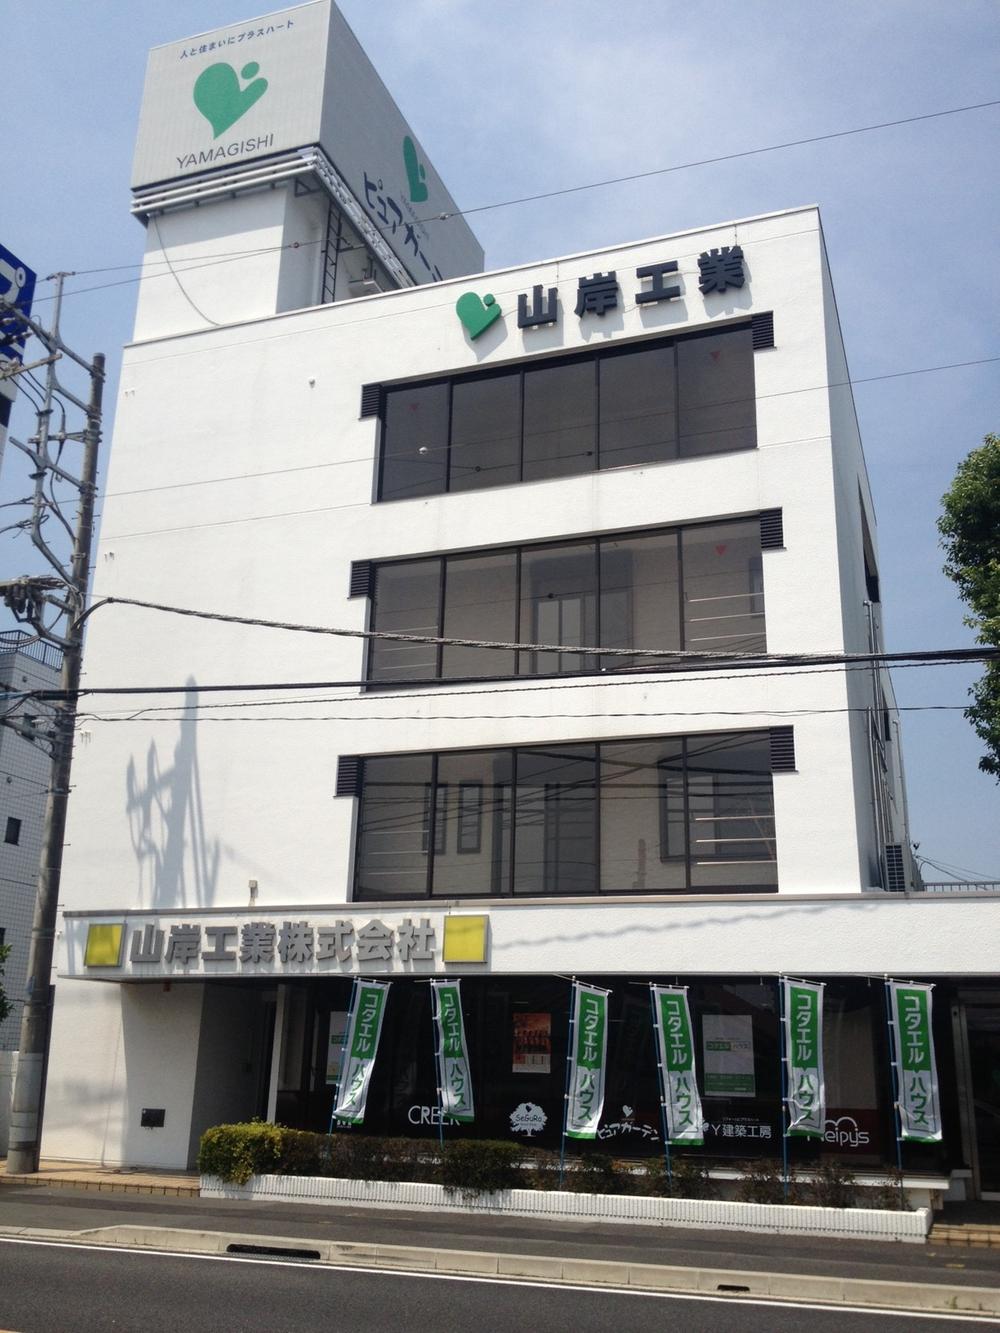 Other. Yamagishi industry to answer Ruhausu. To the ideal of our customers, sincerely, And then quickly to expand the bear house building. 